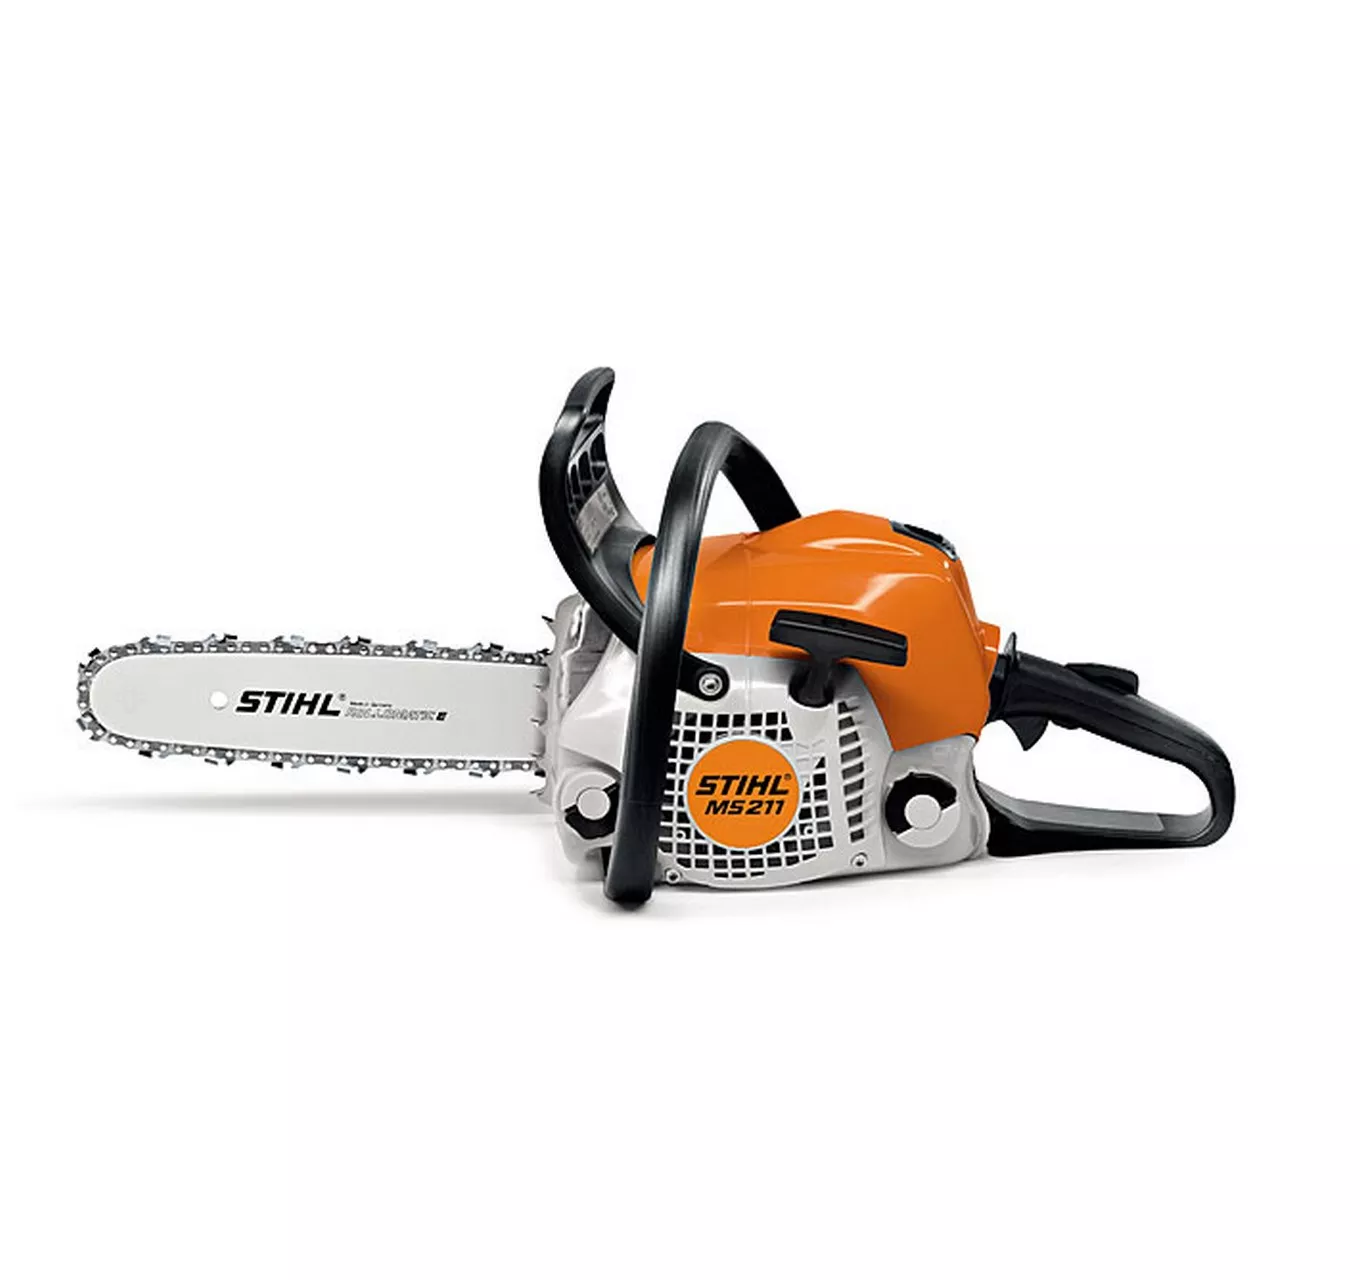 MS 211 Chainsaw 16"